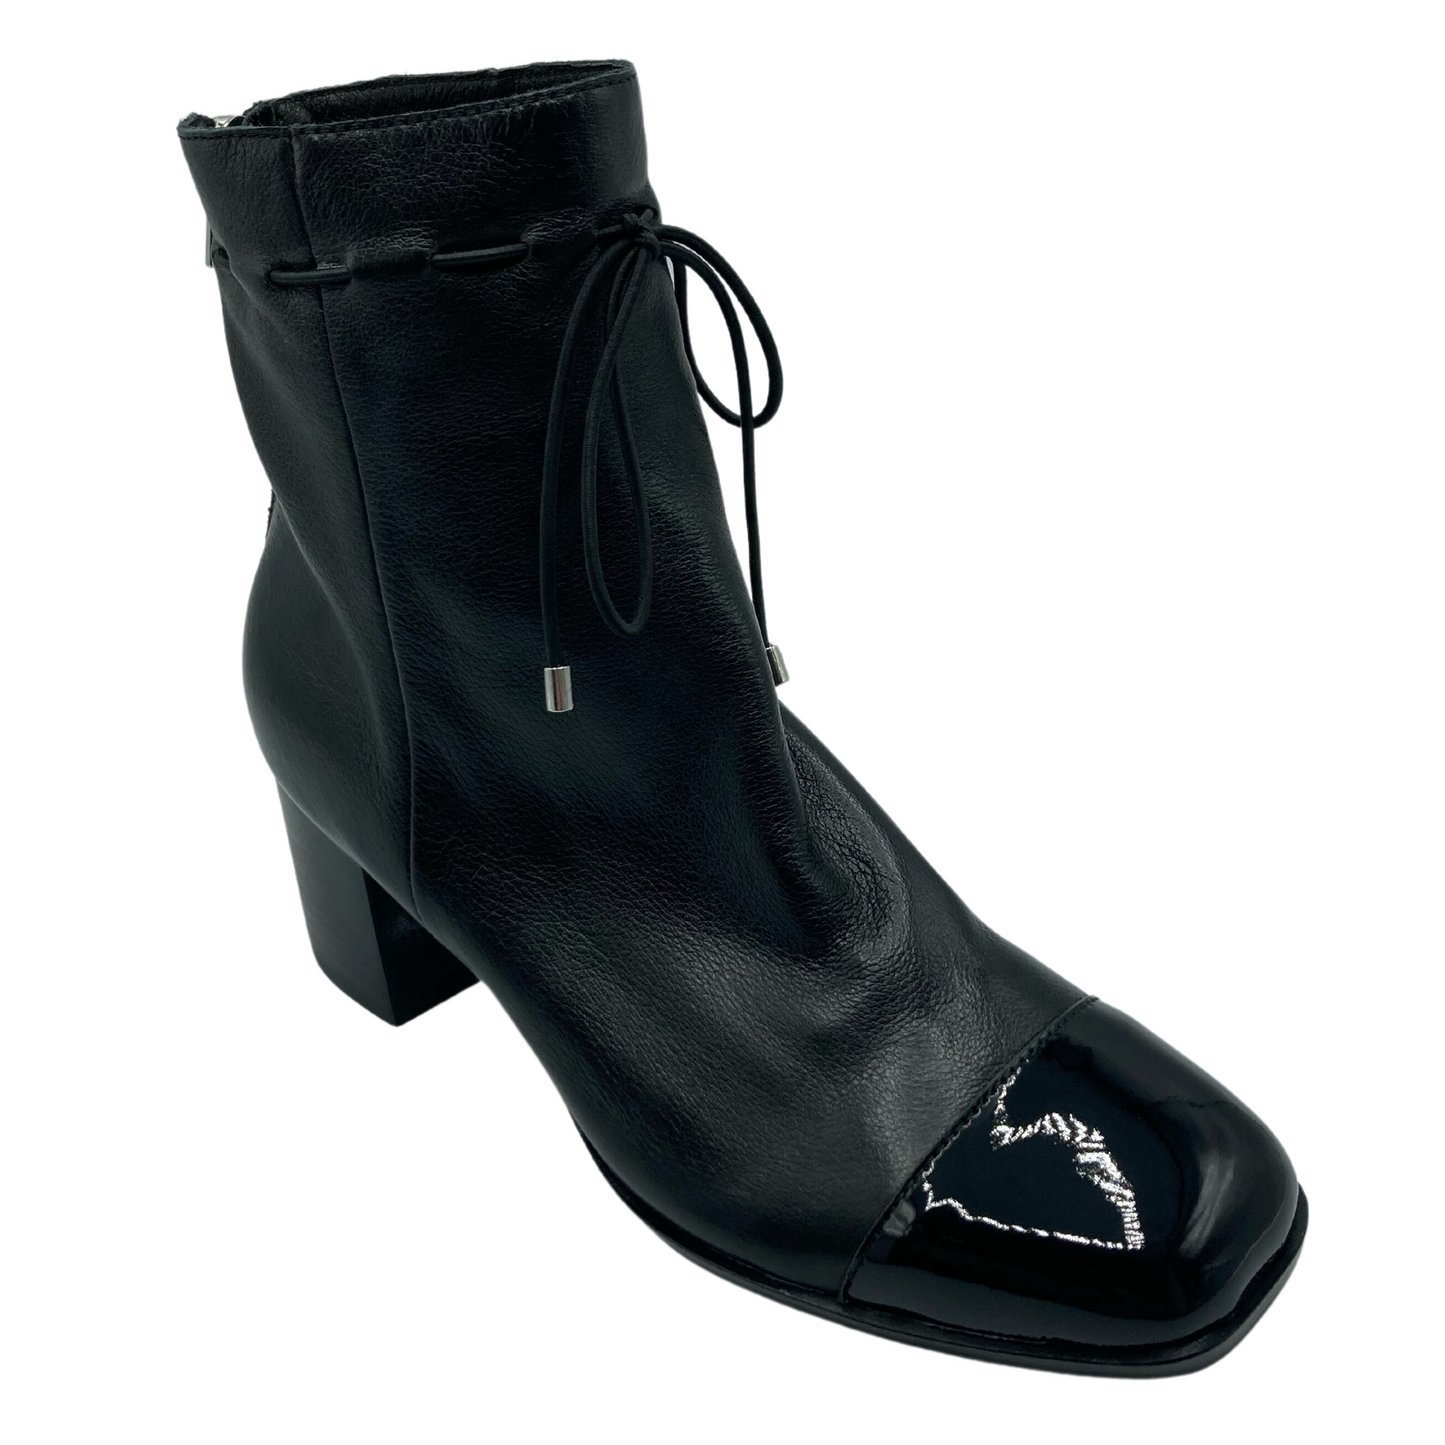 45 degree angled view of black leather ankle boot with patent leather toe cap. Square toe and black heel.